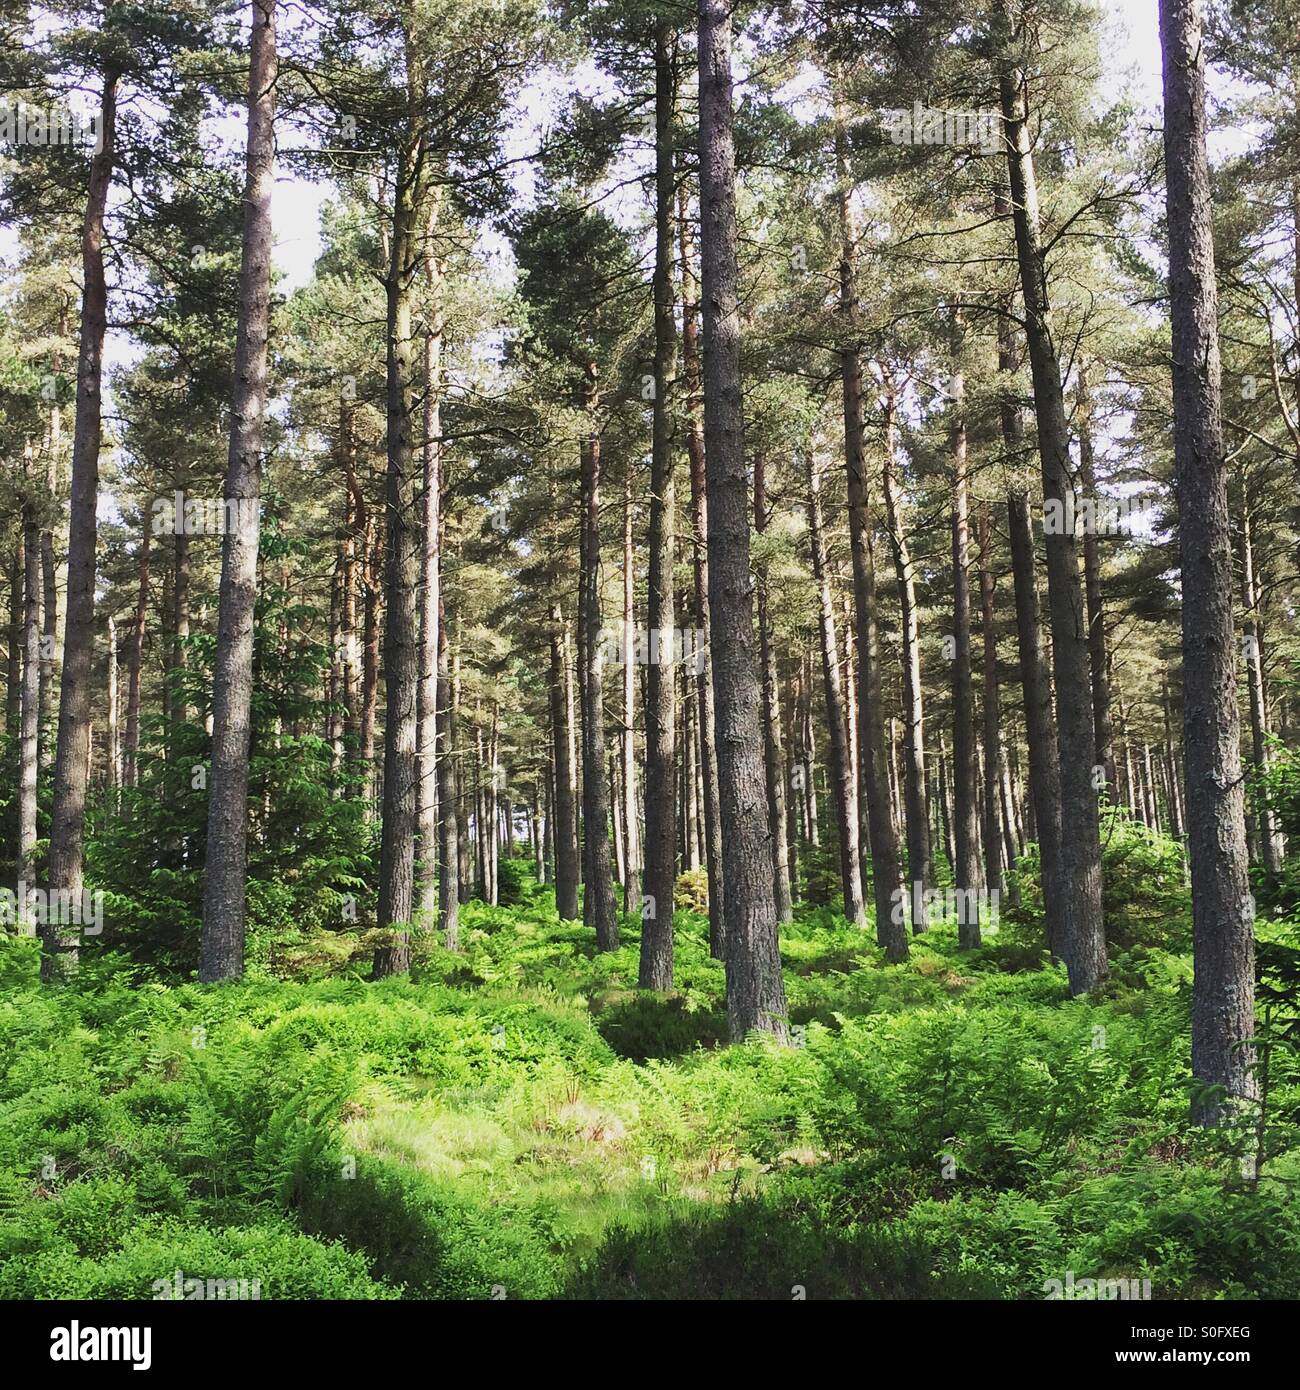 A pine forest in Northumberland, England. Stock Photo